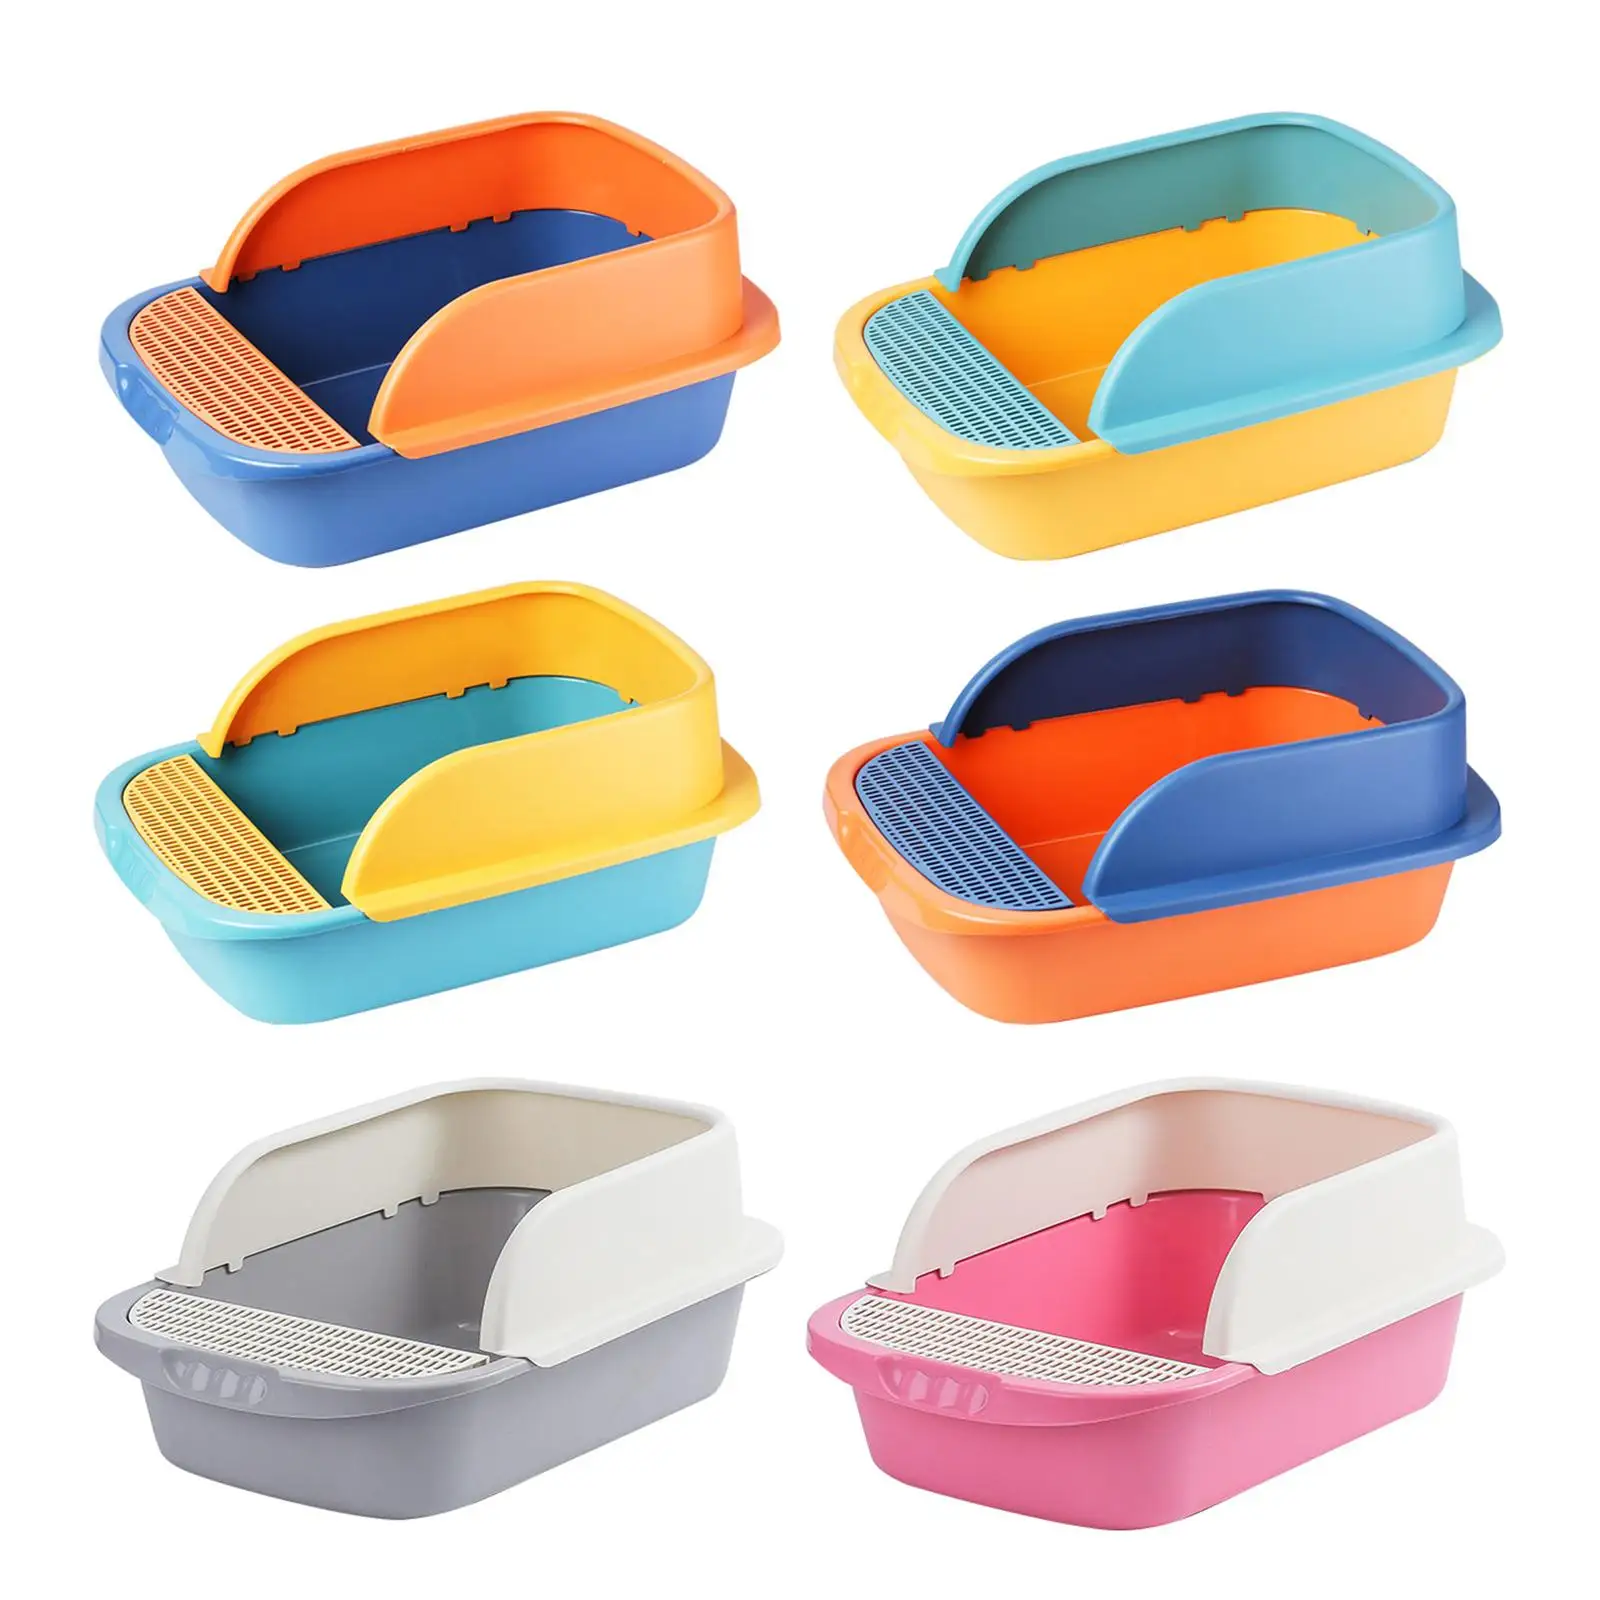 Semi  Litter Box Heighten Detachable Design Tray Bedpan with Shovel Pet Toilet for Small Animals Sand Box Supplies